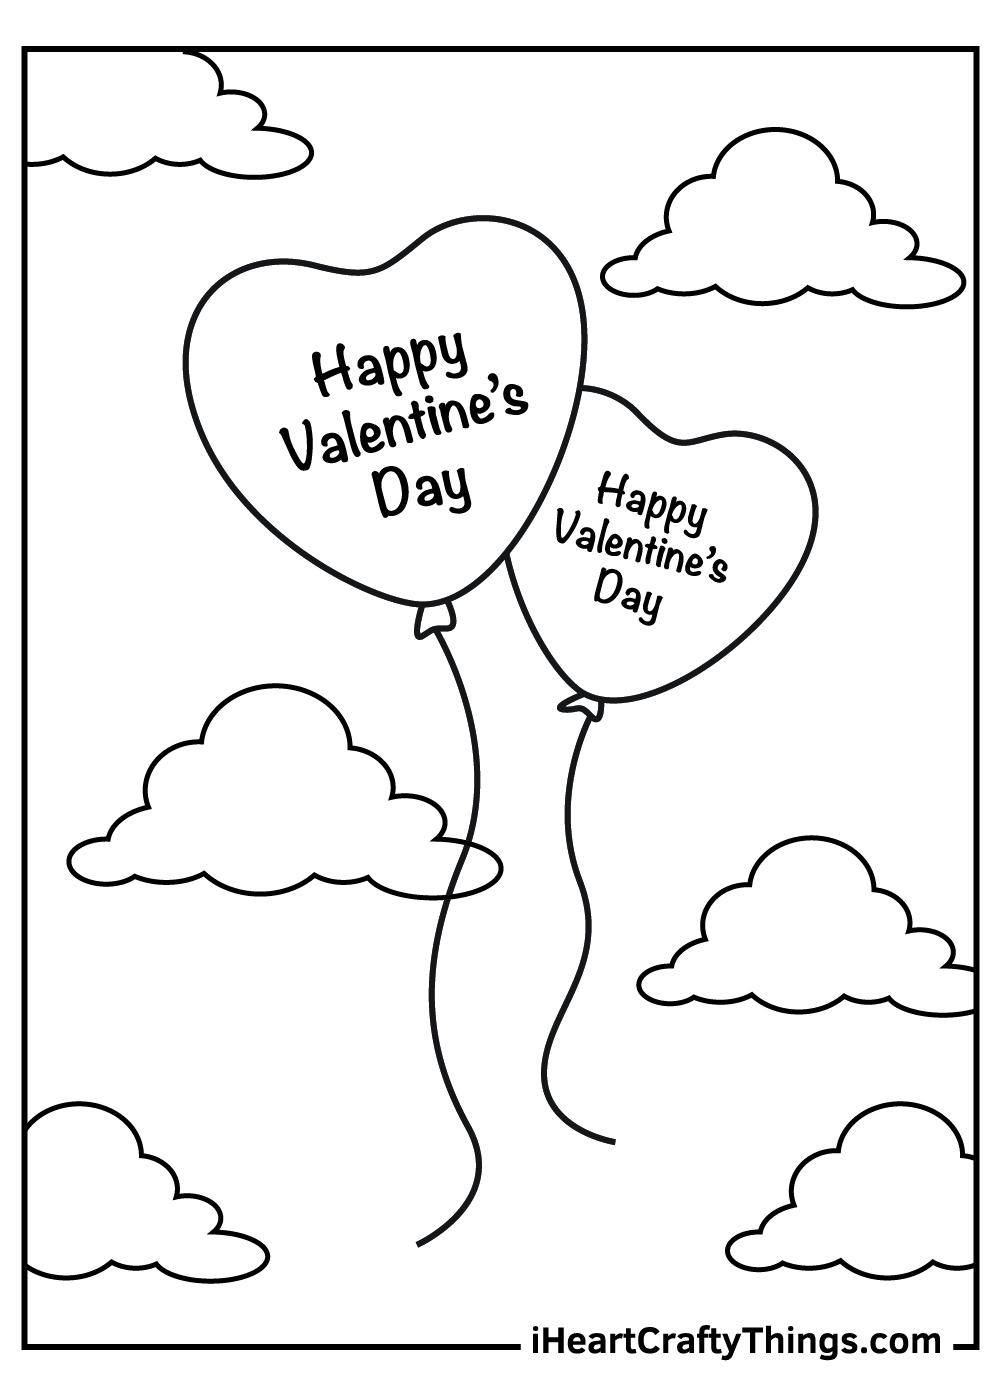 valentine's coloring pages for kids